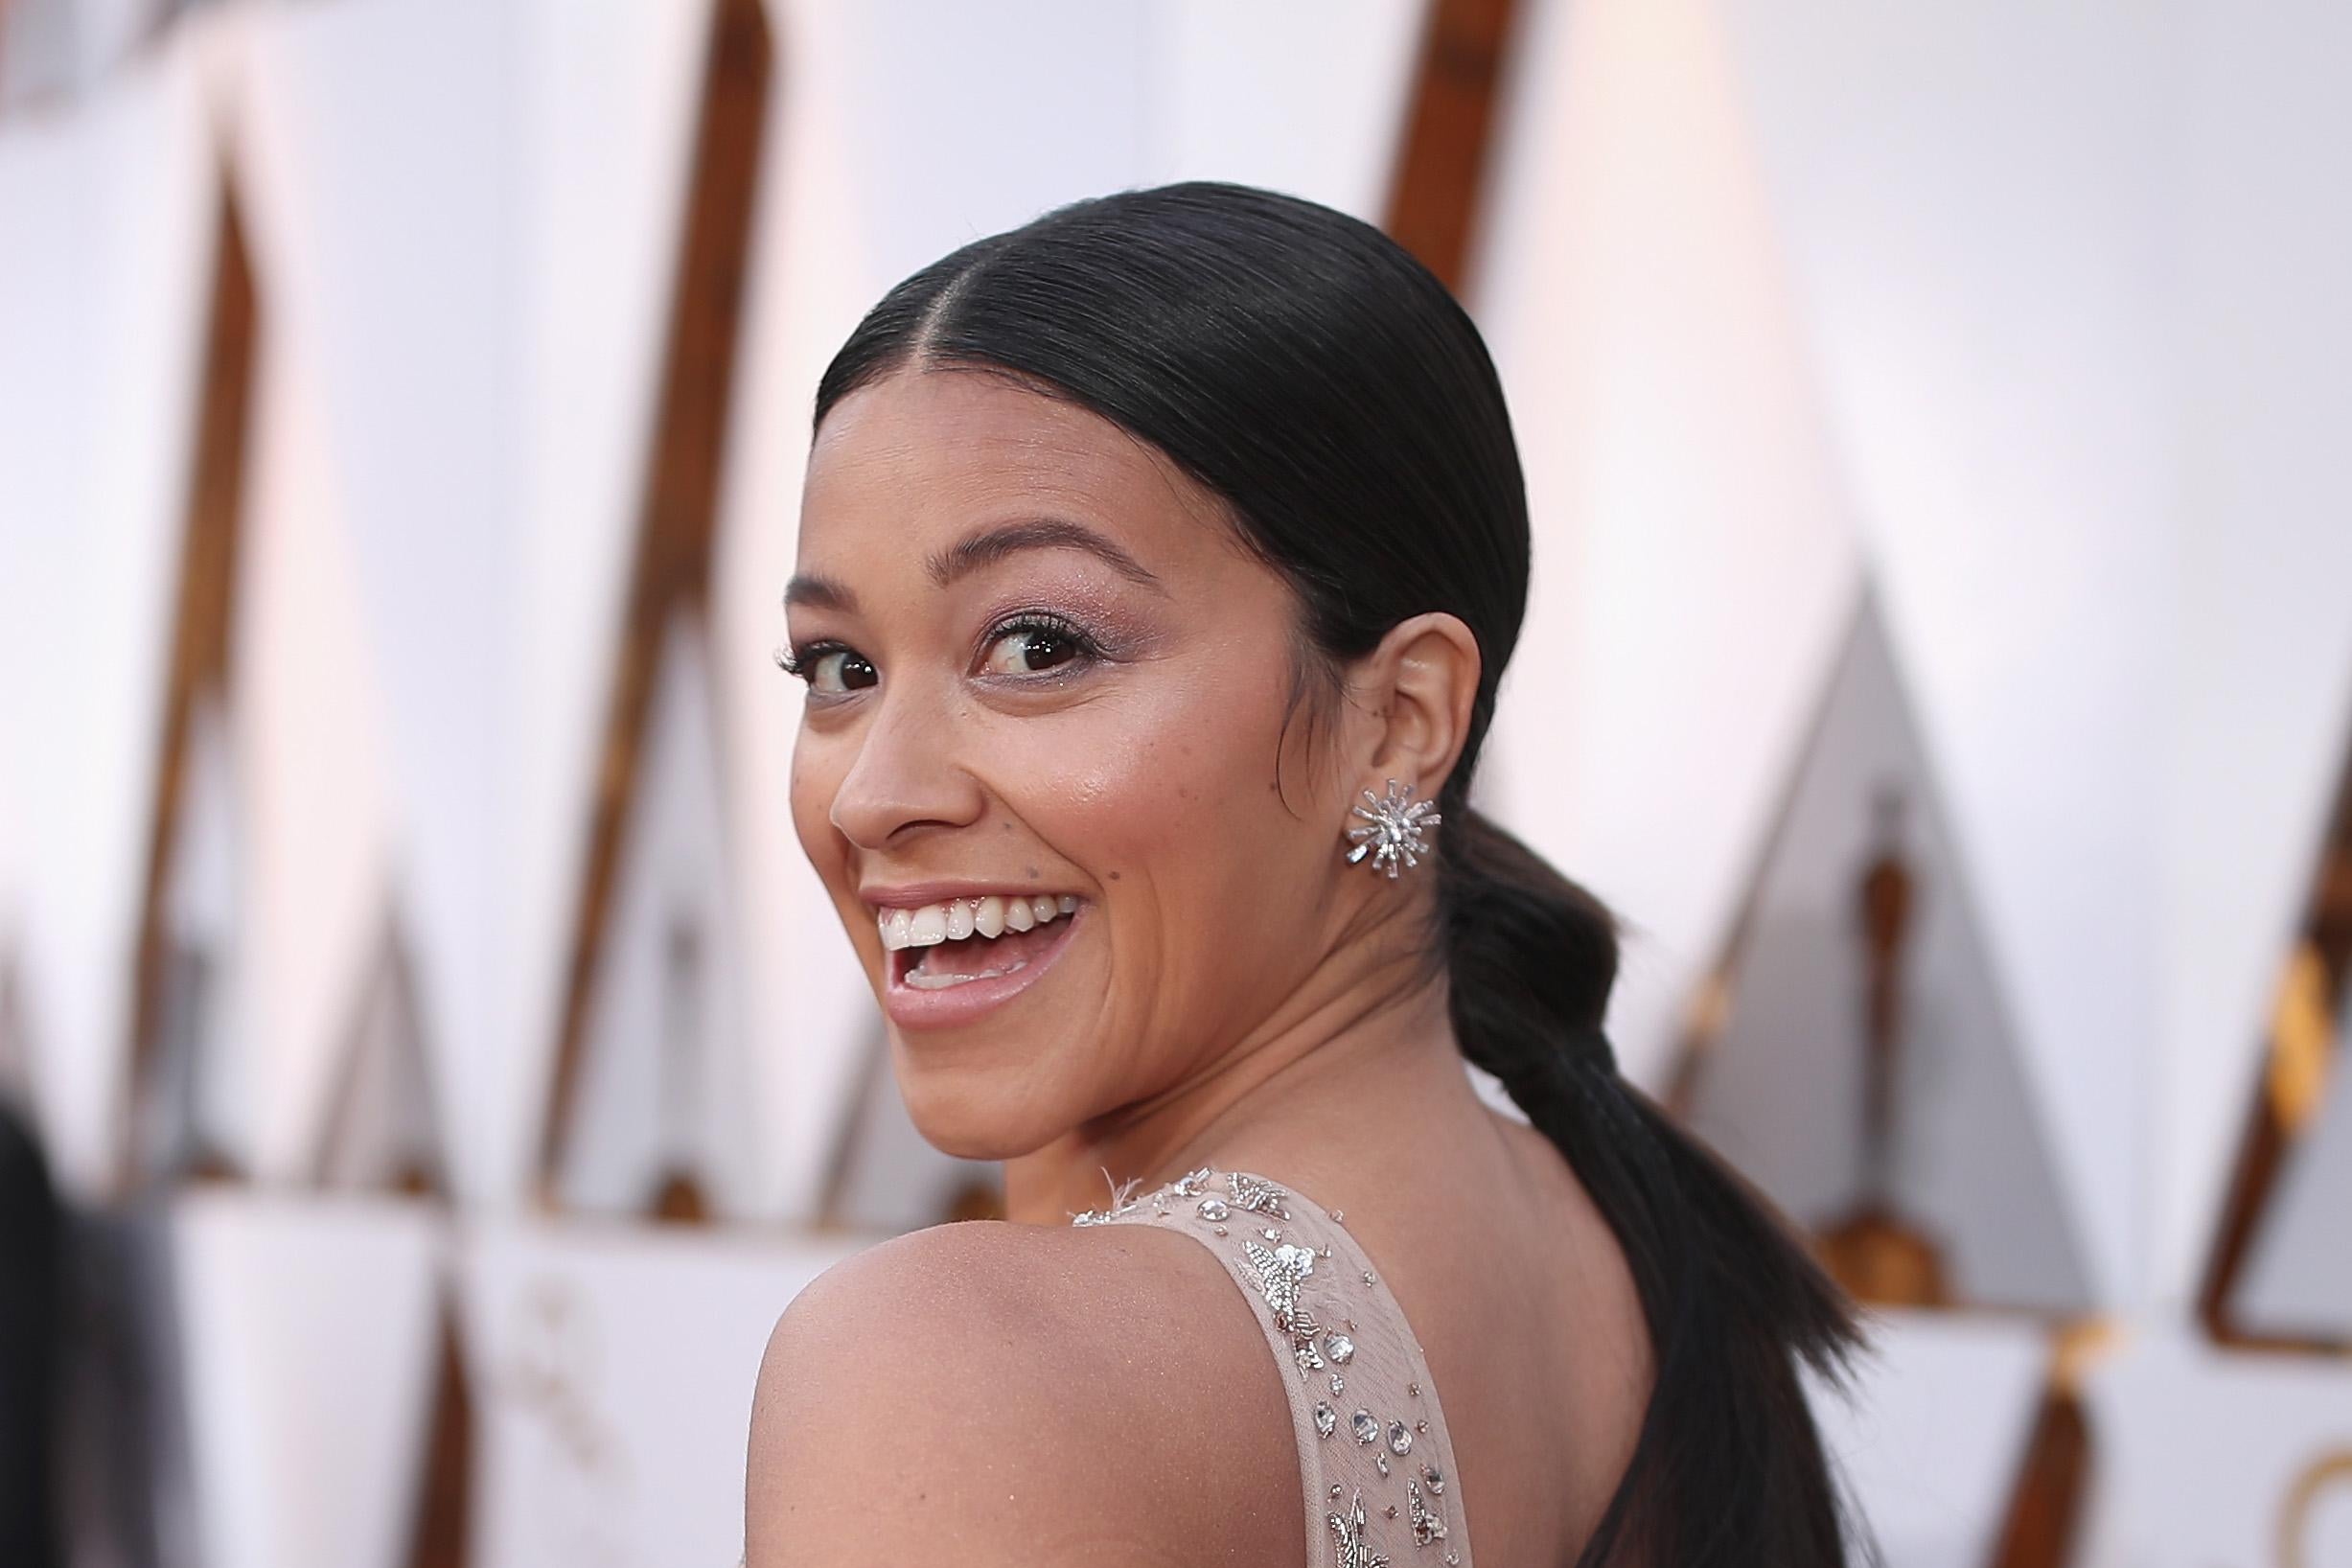 HOLLYWOOD, CA - MARCH 04: Gina Rodriguez attends the 90th Annual Academy Awards at Hollywood & Highland Center on March 4, 2018 in Hollywood, California.  (Photo by Christopher Polk/Getty Images)